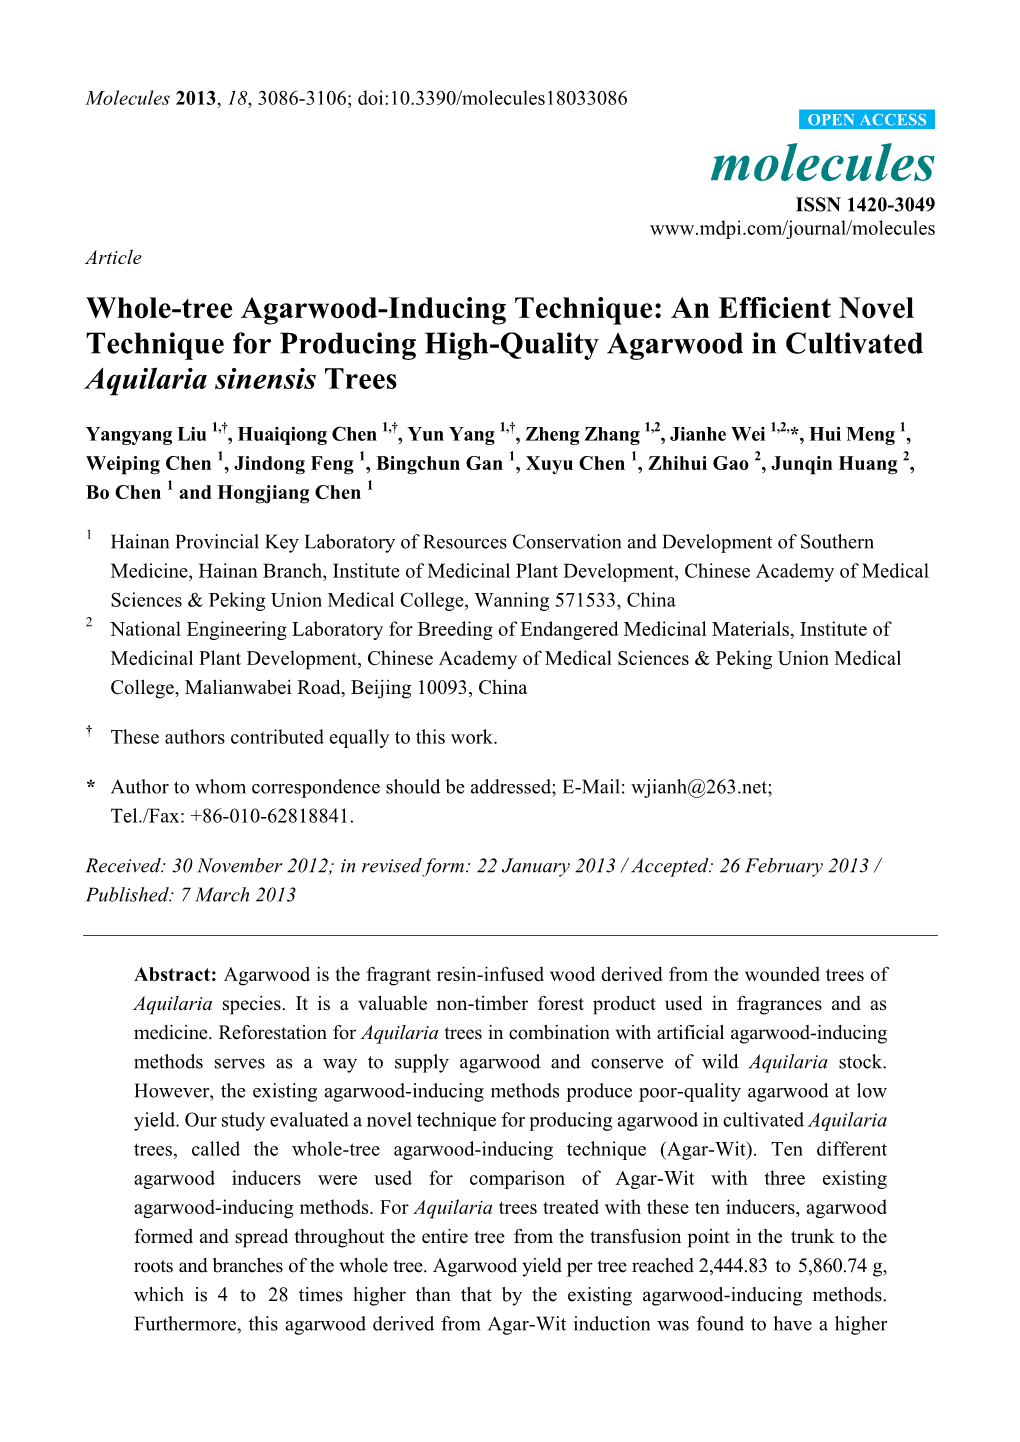 Whole-Tree Agarwood-Inducing Technique: an Efficient Novel Technique for Producing High-Quality Agarwood in Cultivated Aquilaria Sinensis Trees